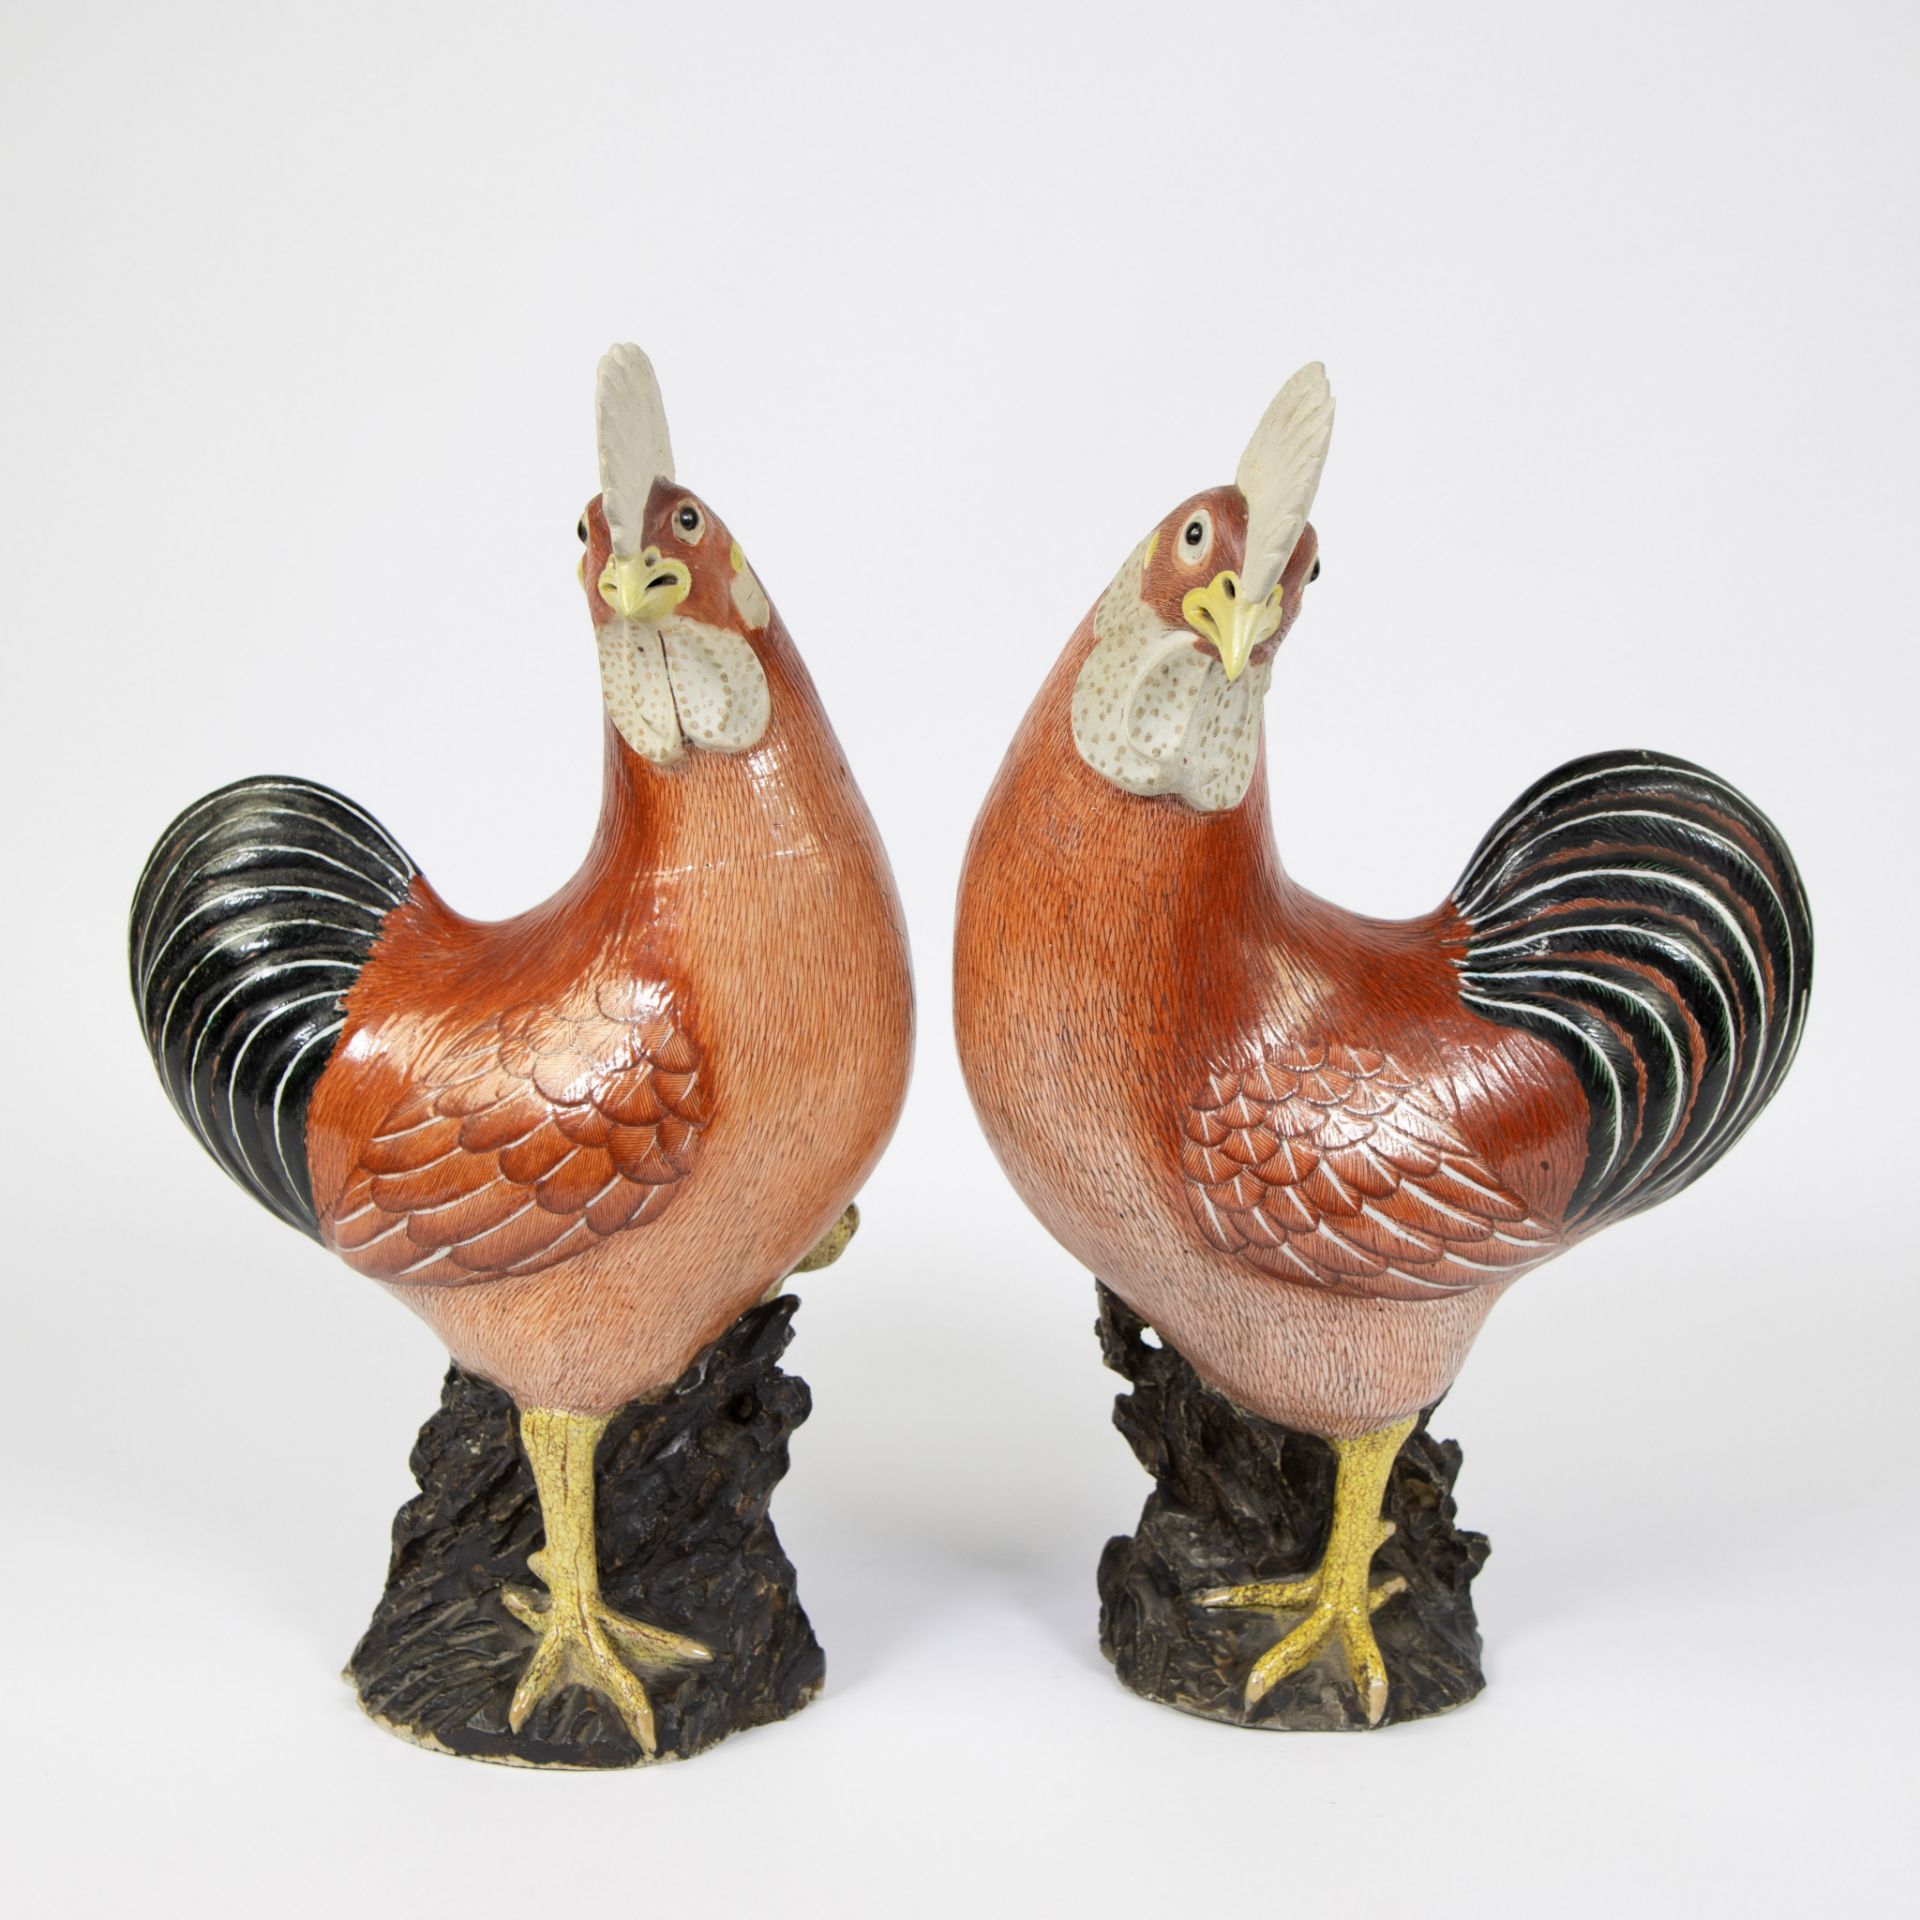 Pair of Chinese ceramic roosters, finely painted in reddish brown, 18th century Kangxi